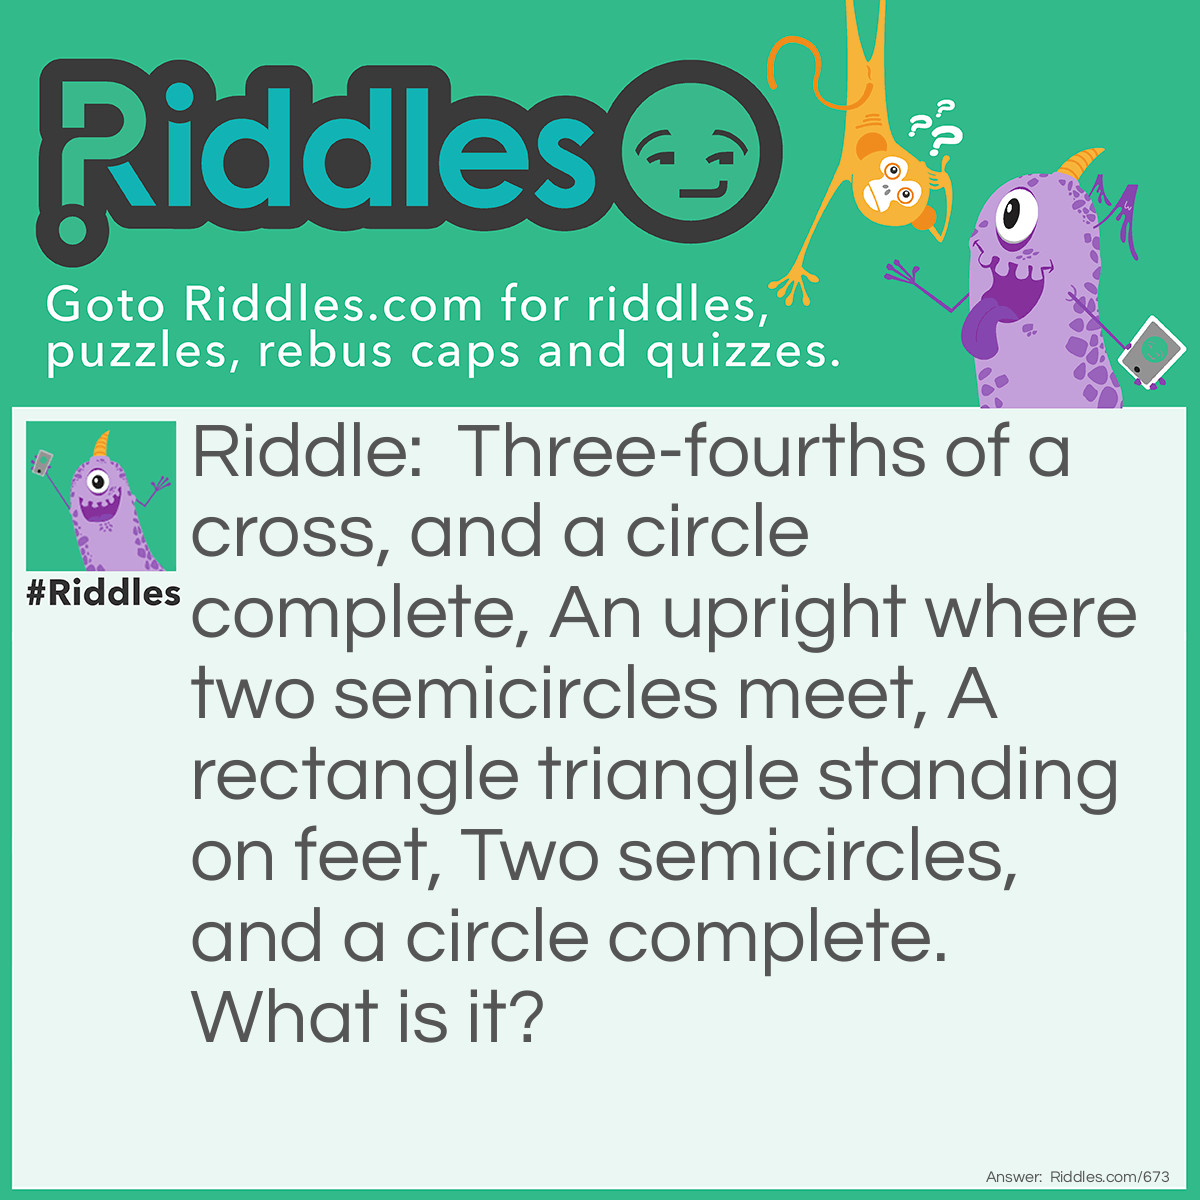 Riddle: Three-fourths of a cross, and a circle complete, An upright where two semicircles meet, A rectangle triangle standing on feet, Two semicircles, and a circle complete. What is it? Answer: Tobacco.